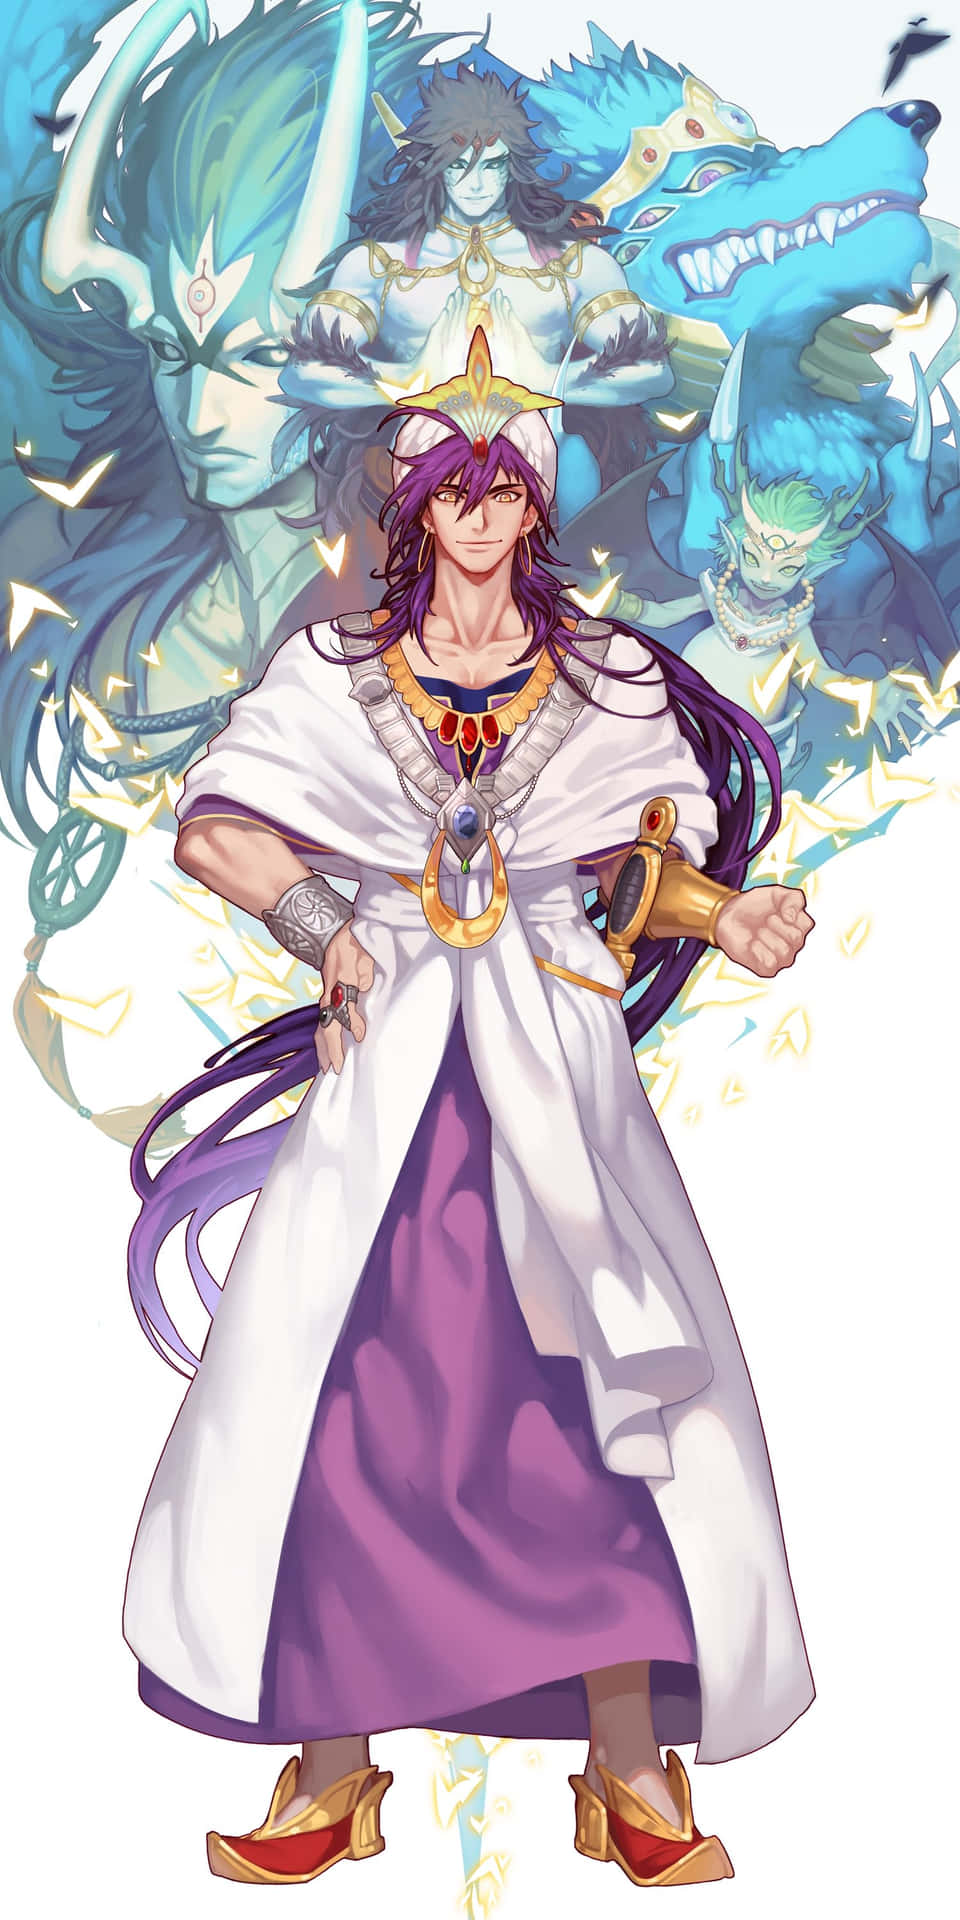 Sinbad Confidently Commands The Storm In A Dynamic Action Pose. Wallpaper